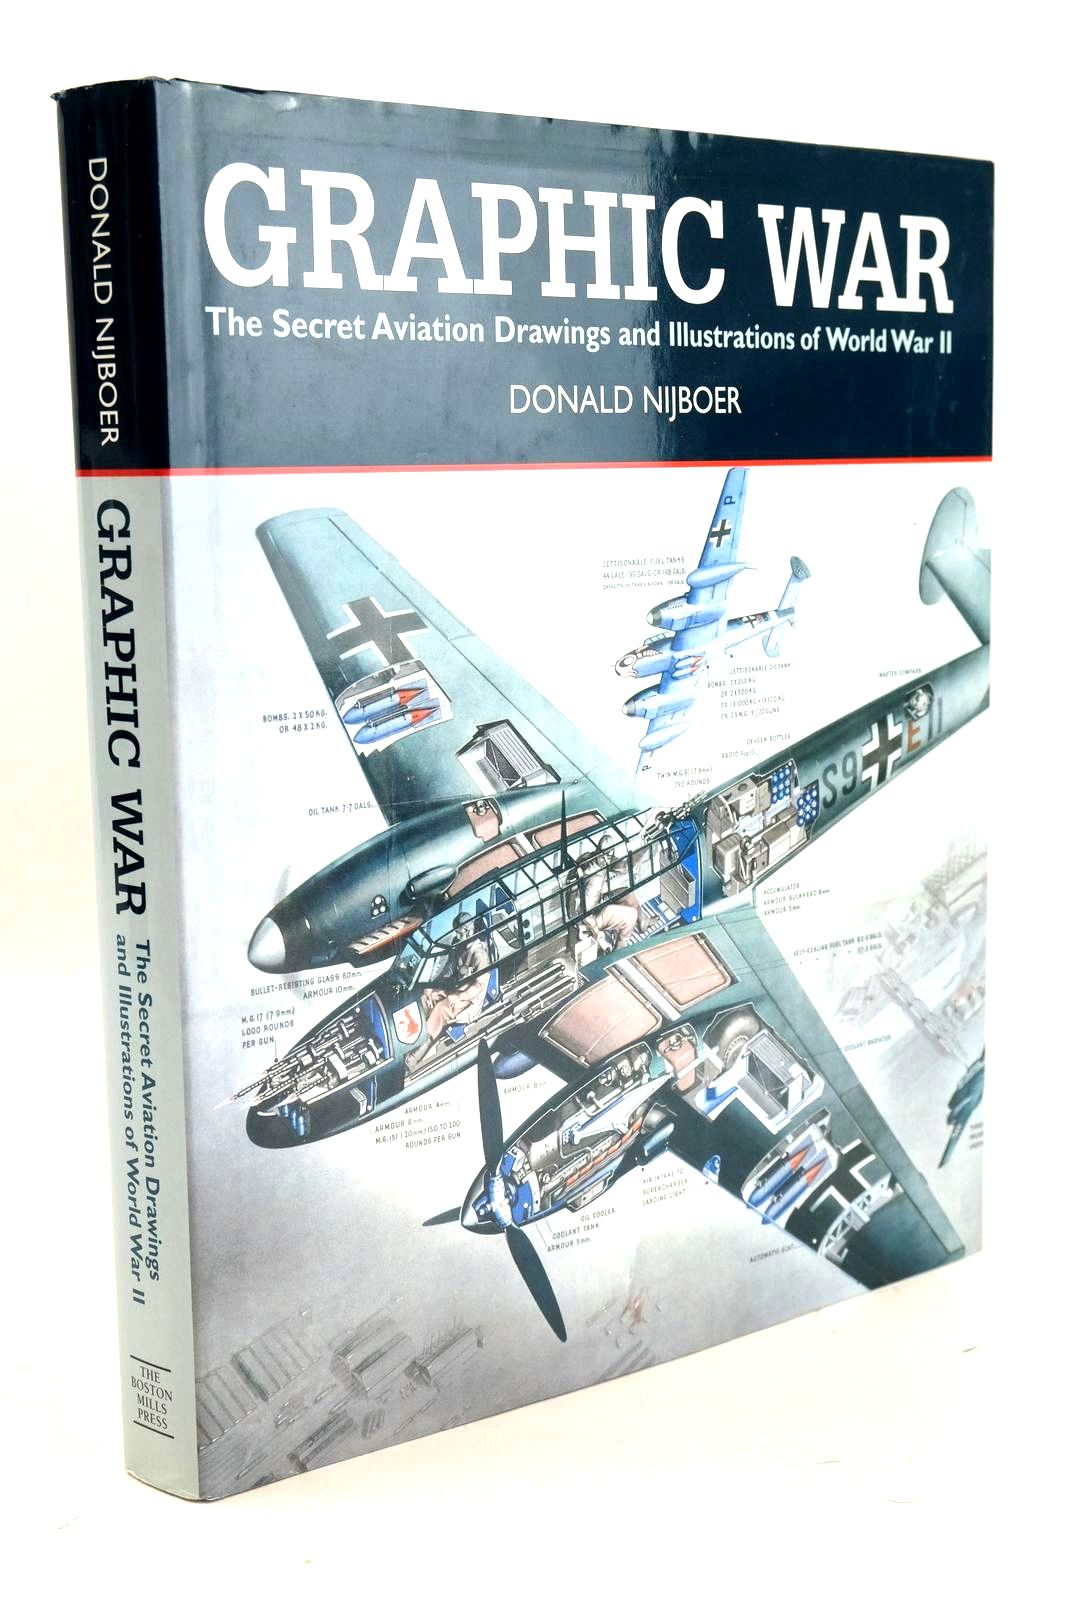 Graphic War The Secret Aviation Drawings and Illustrations of World War II